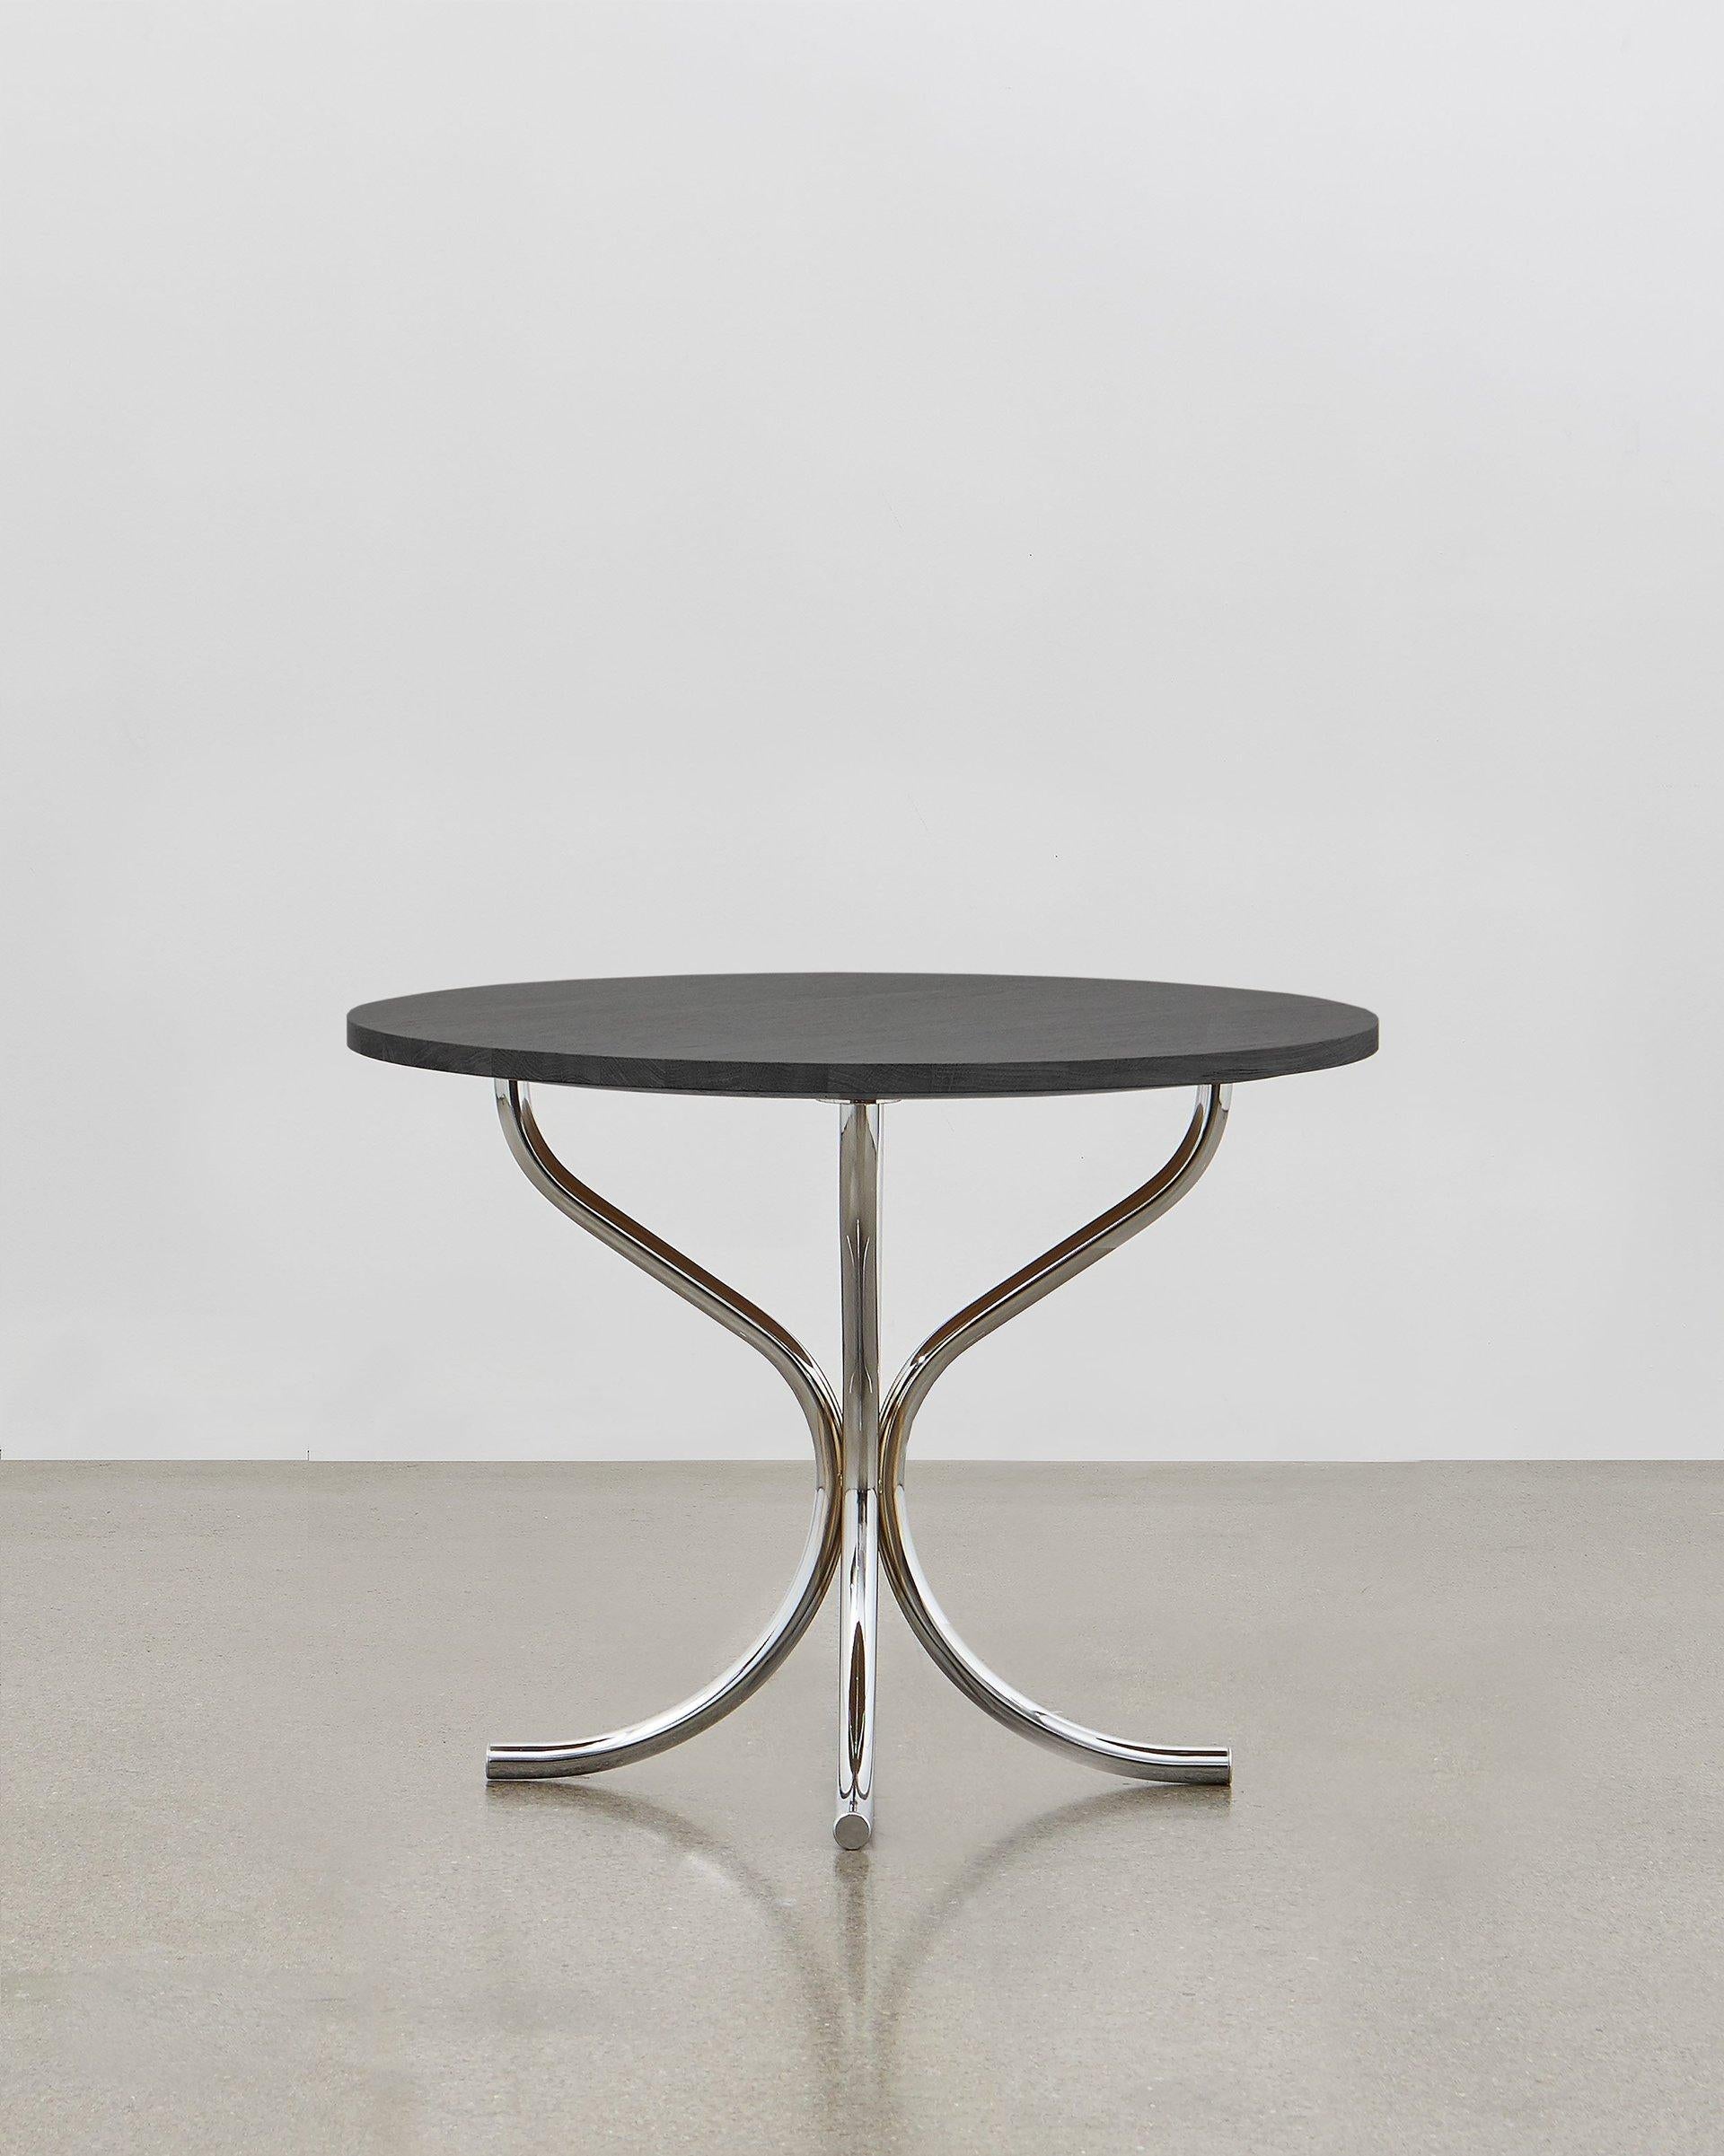 The PH lounge table designed by Poul Henningsen is the perfect addition to any lounge space where a table is required to gather around or for display. Taller than a low coffee table, the PH lounge table lends itself to a wide variety of settings,